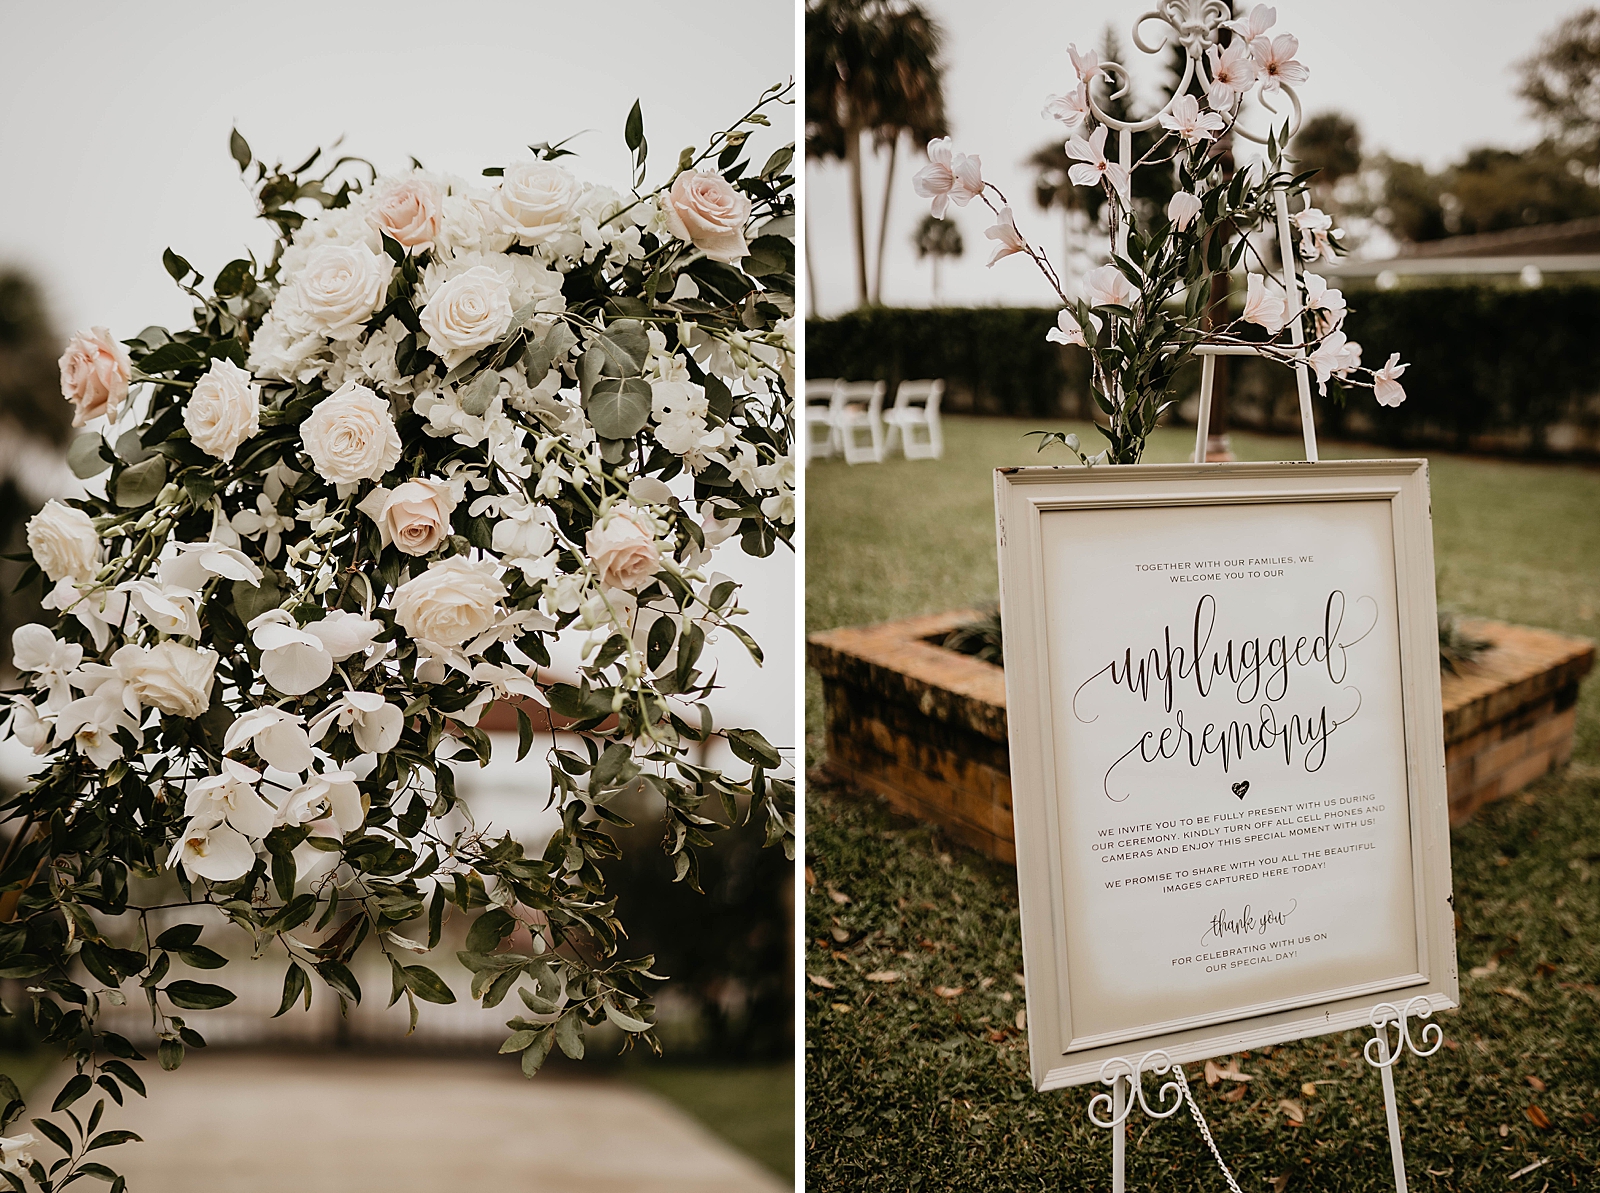 Detail shot of white roses and unplug ceremony sign